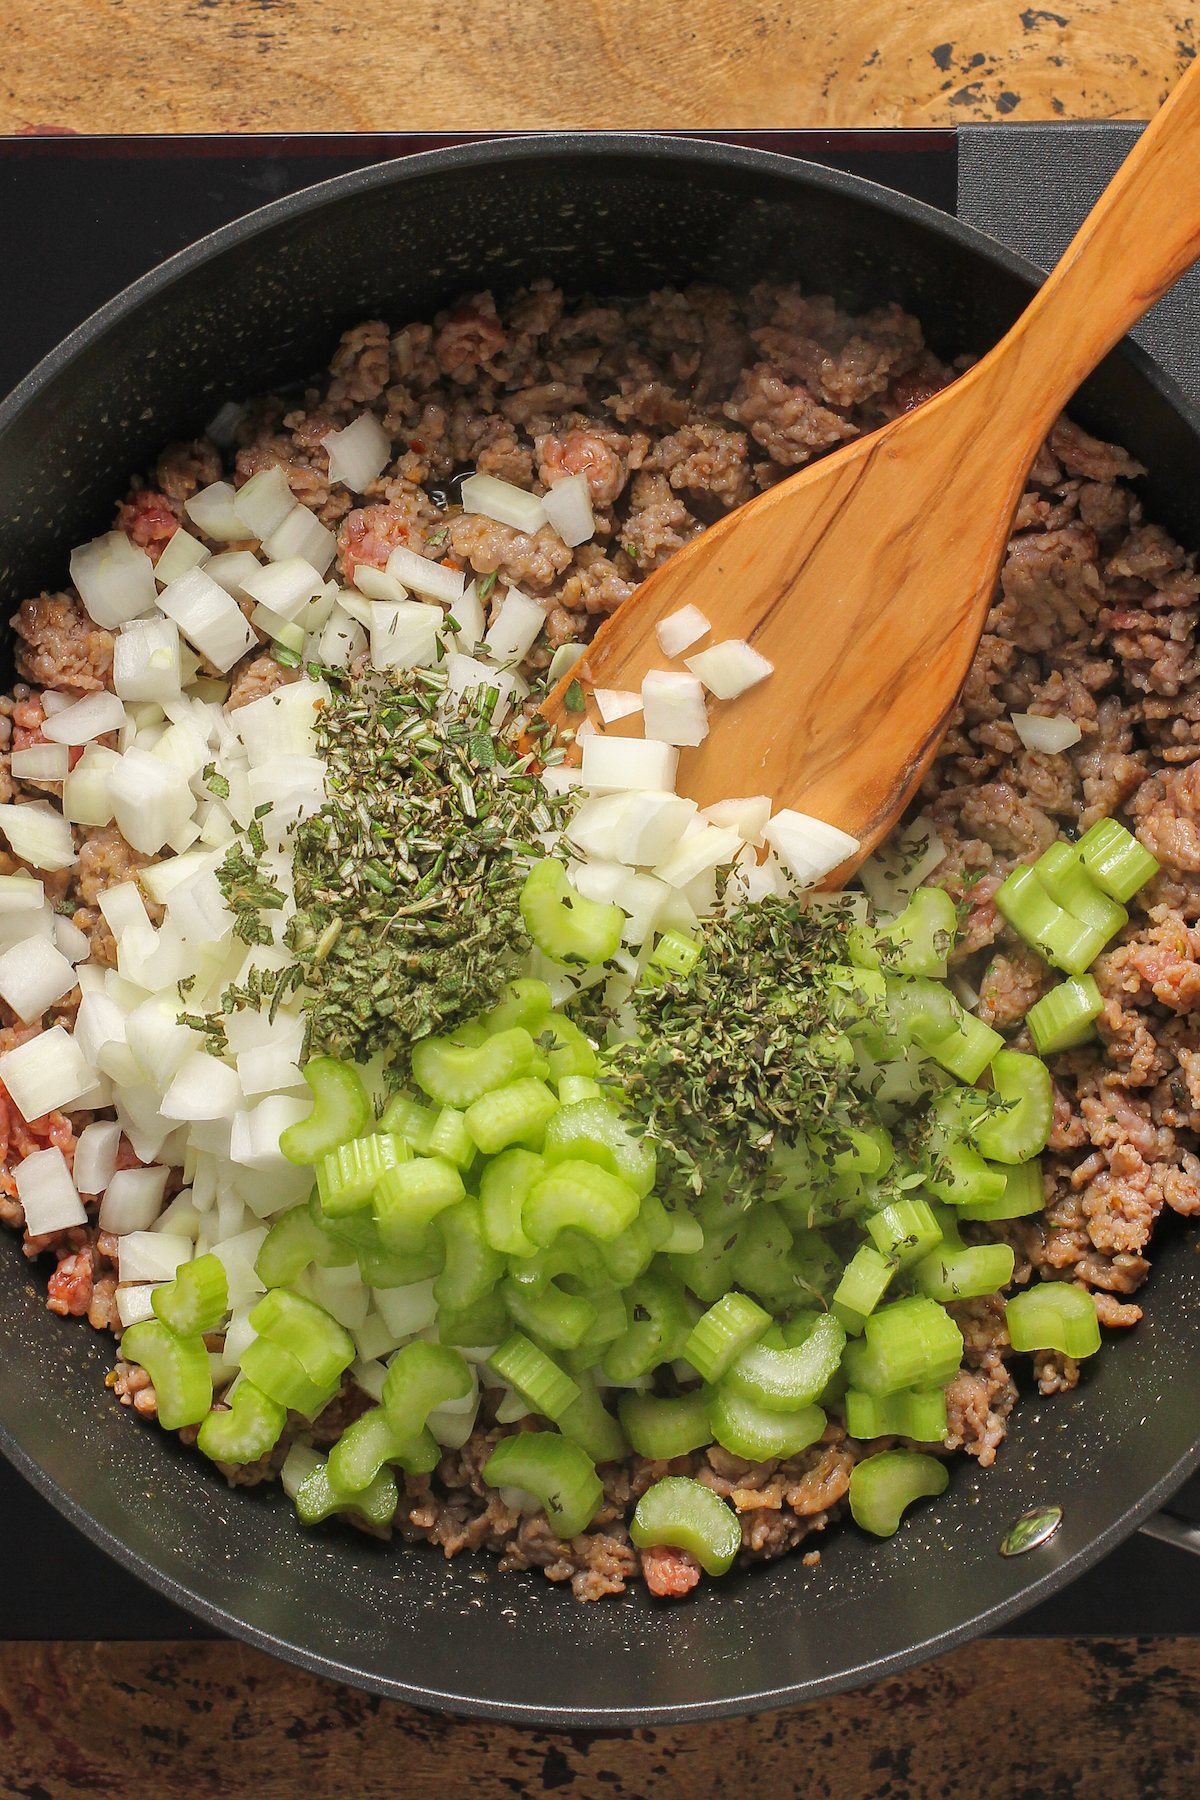 Sausage, onion, celery, herbs, and other ingredients in a skillet.